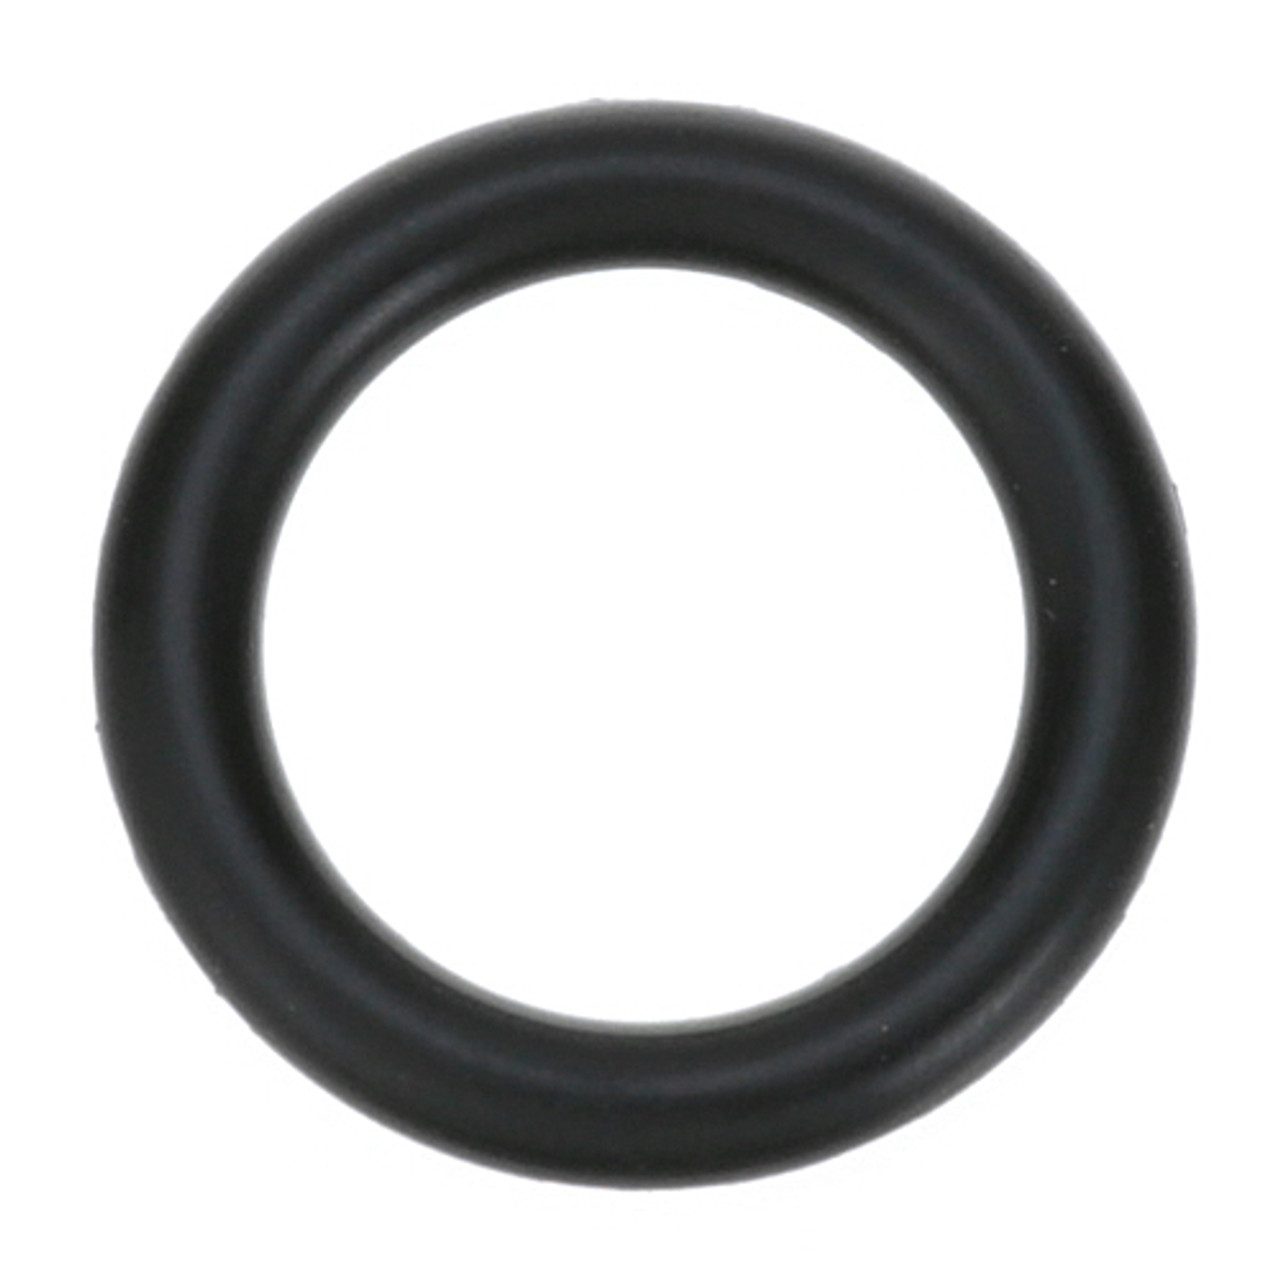 O-Ring 5/8" Id X 1/8" Width - Replacement Part For Stero P57-2031